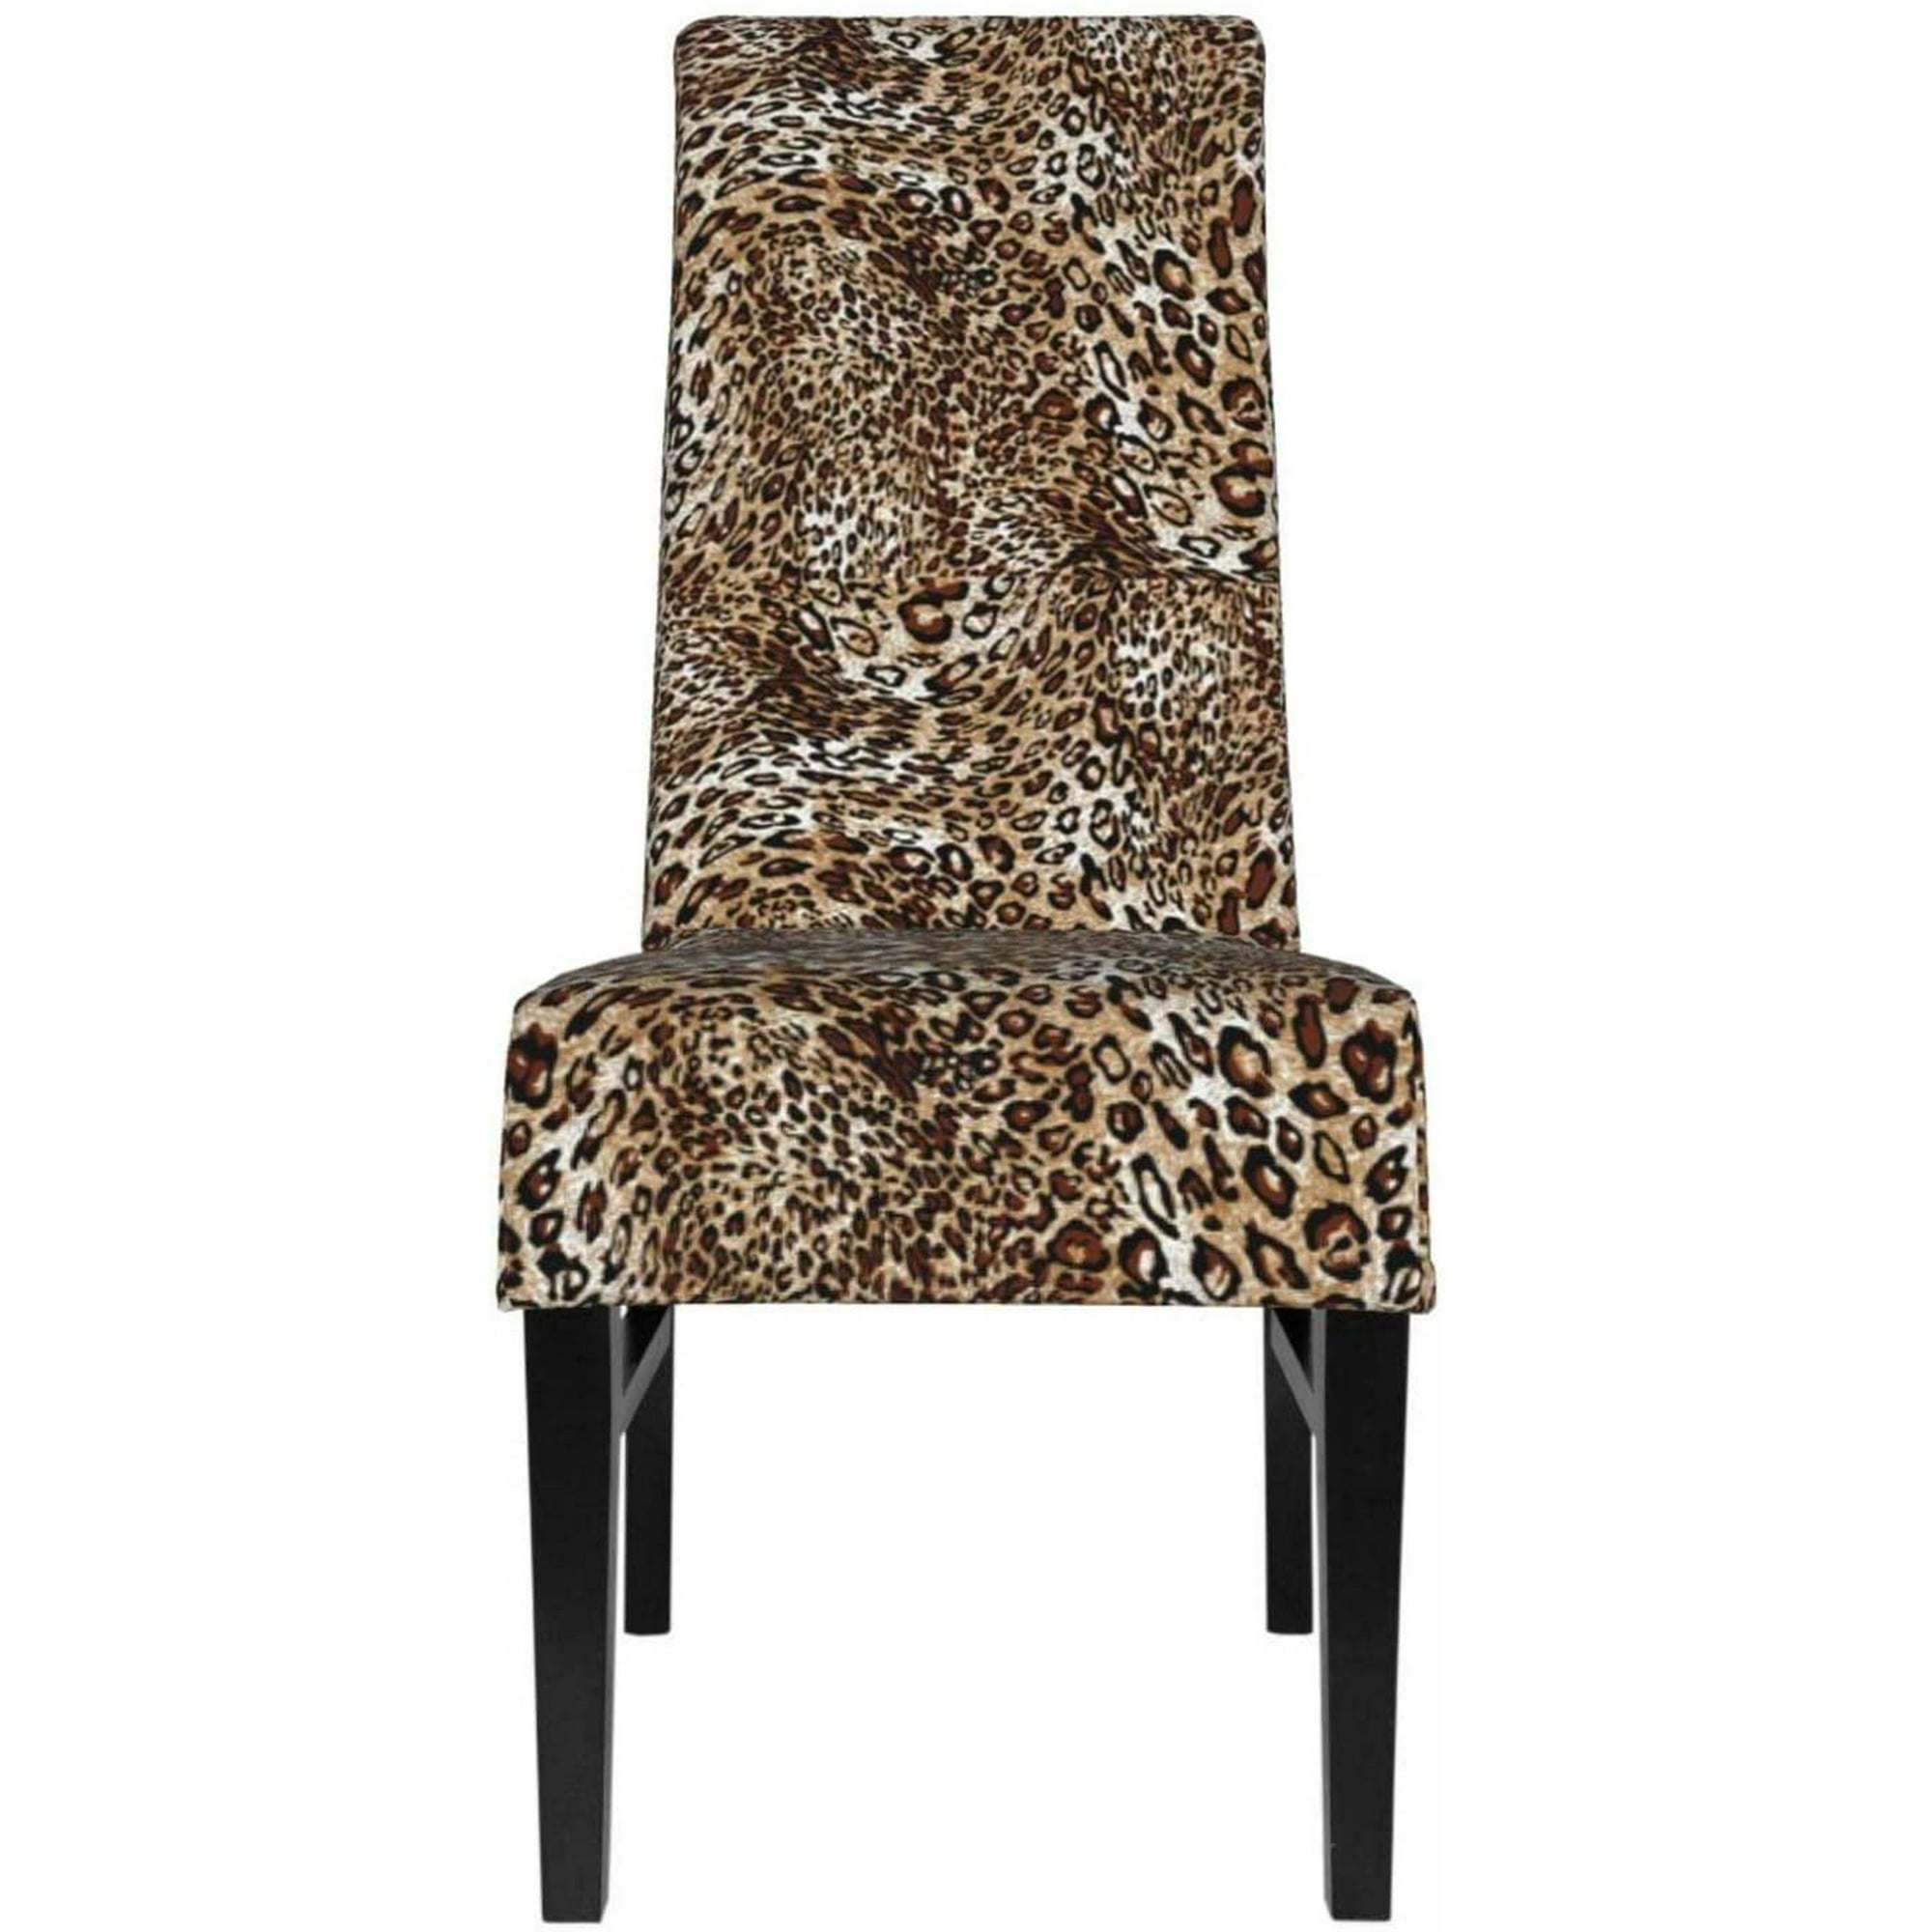 Leopard Print Chair Covers For Dining, Animal Print Parson Chair Slipcovers